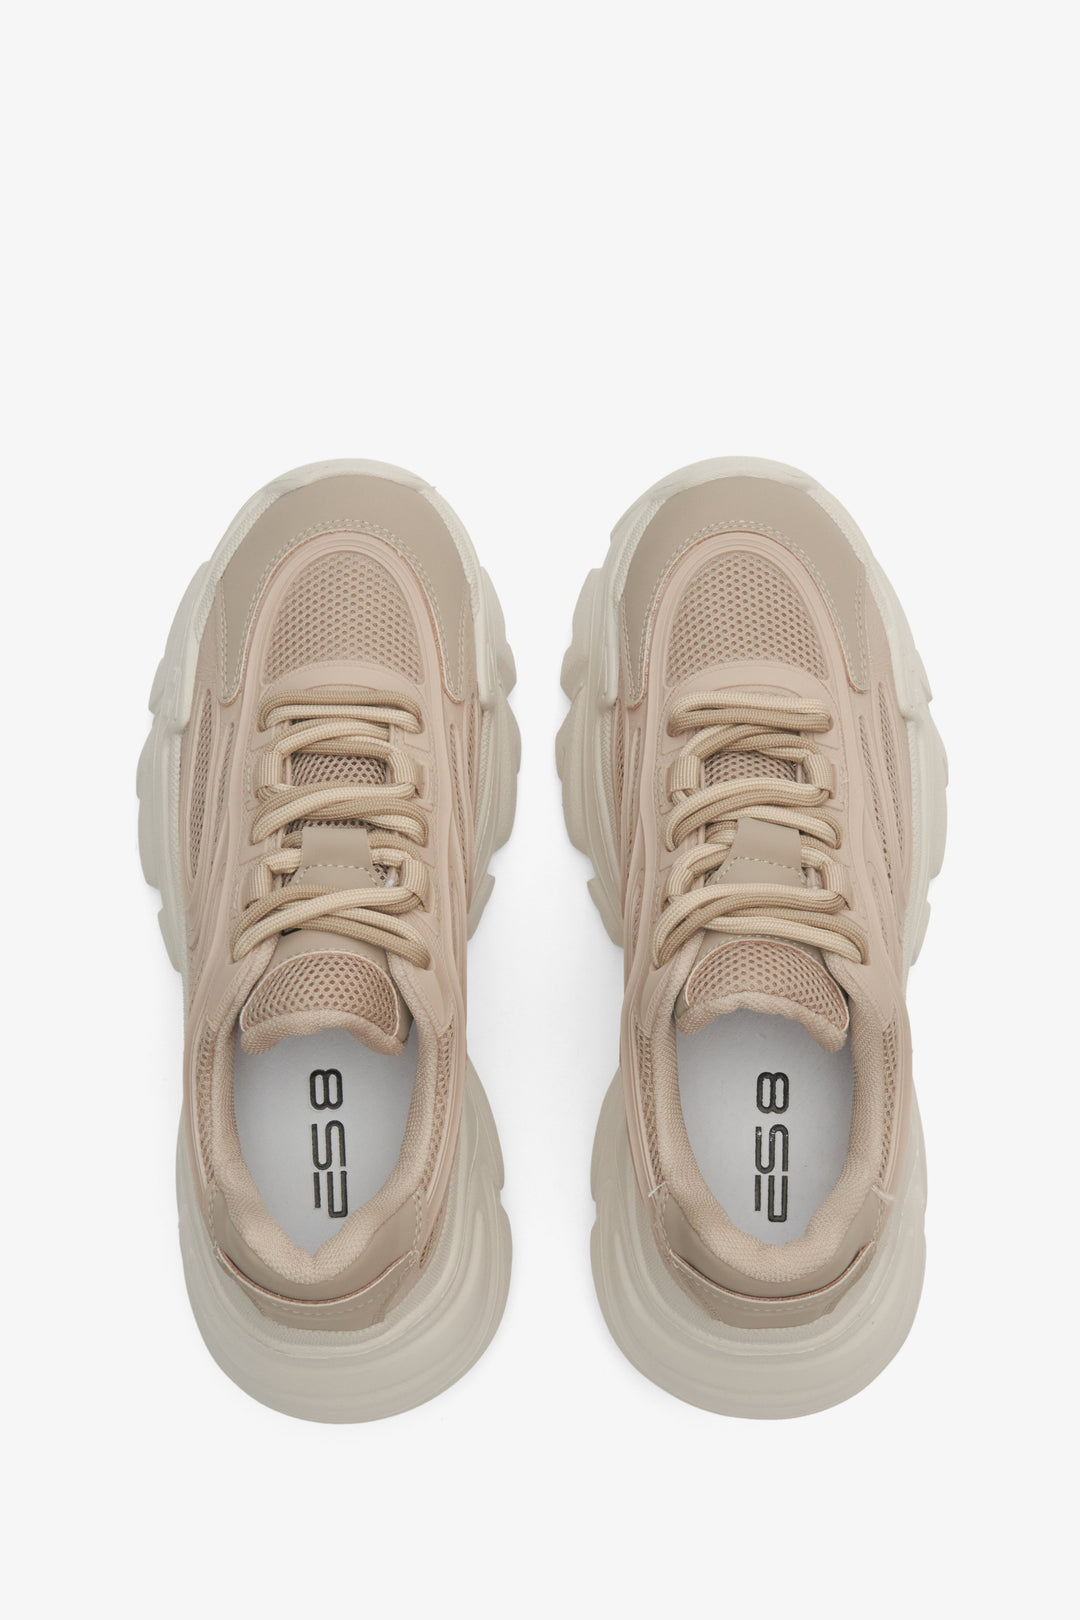 Women's light brown chunky platform sneakers ES 8 - presentation from above.